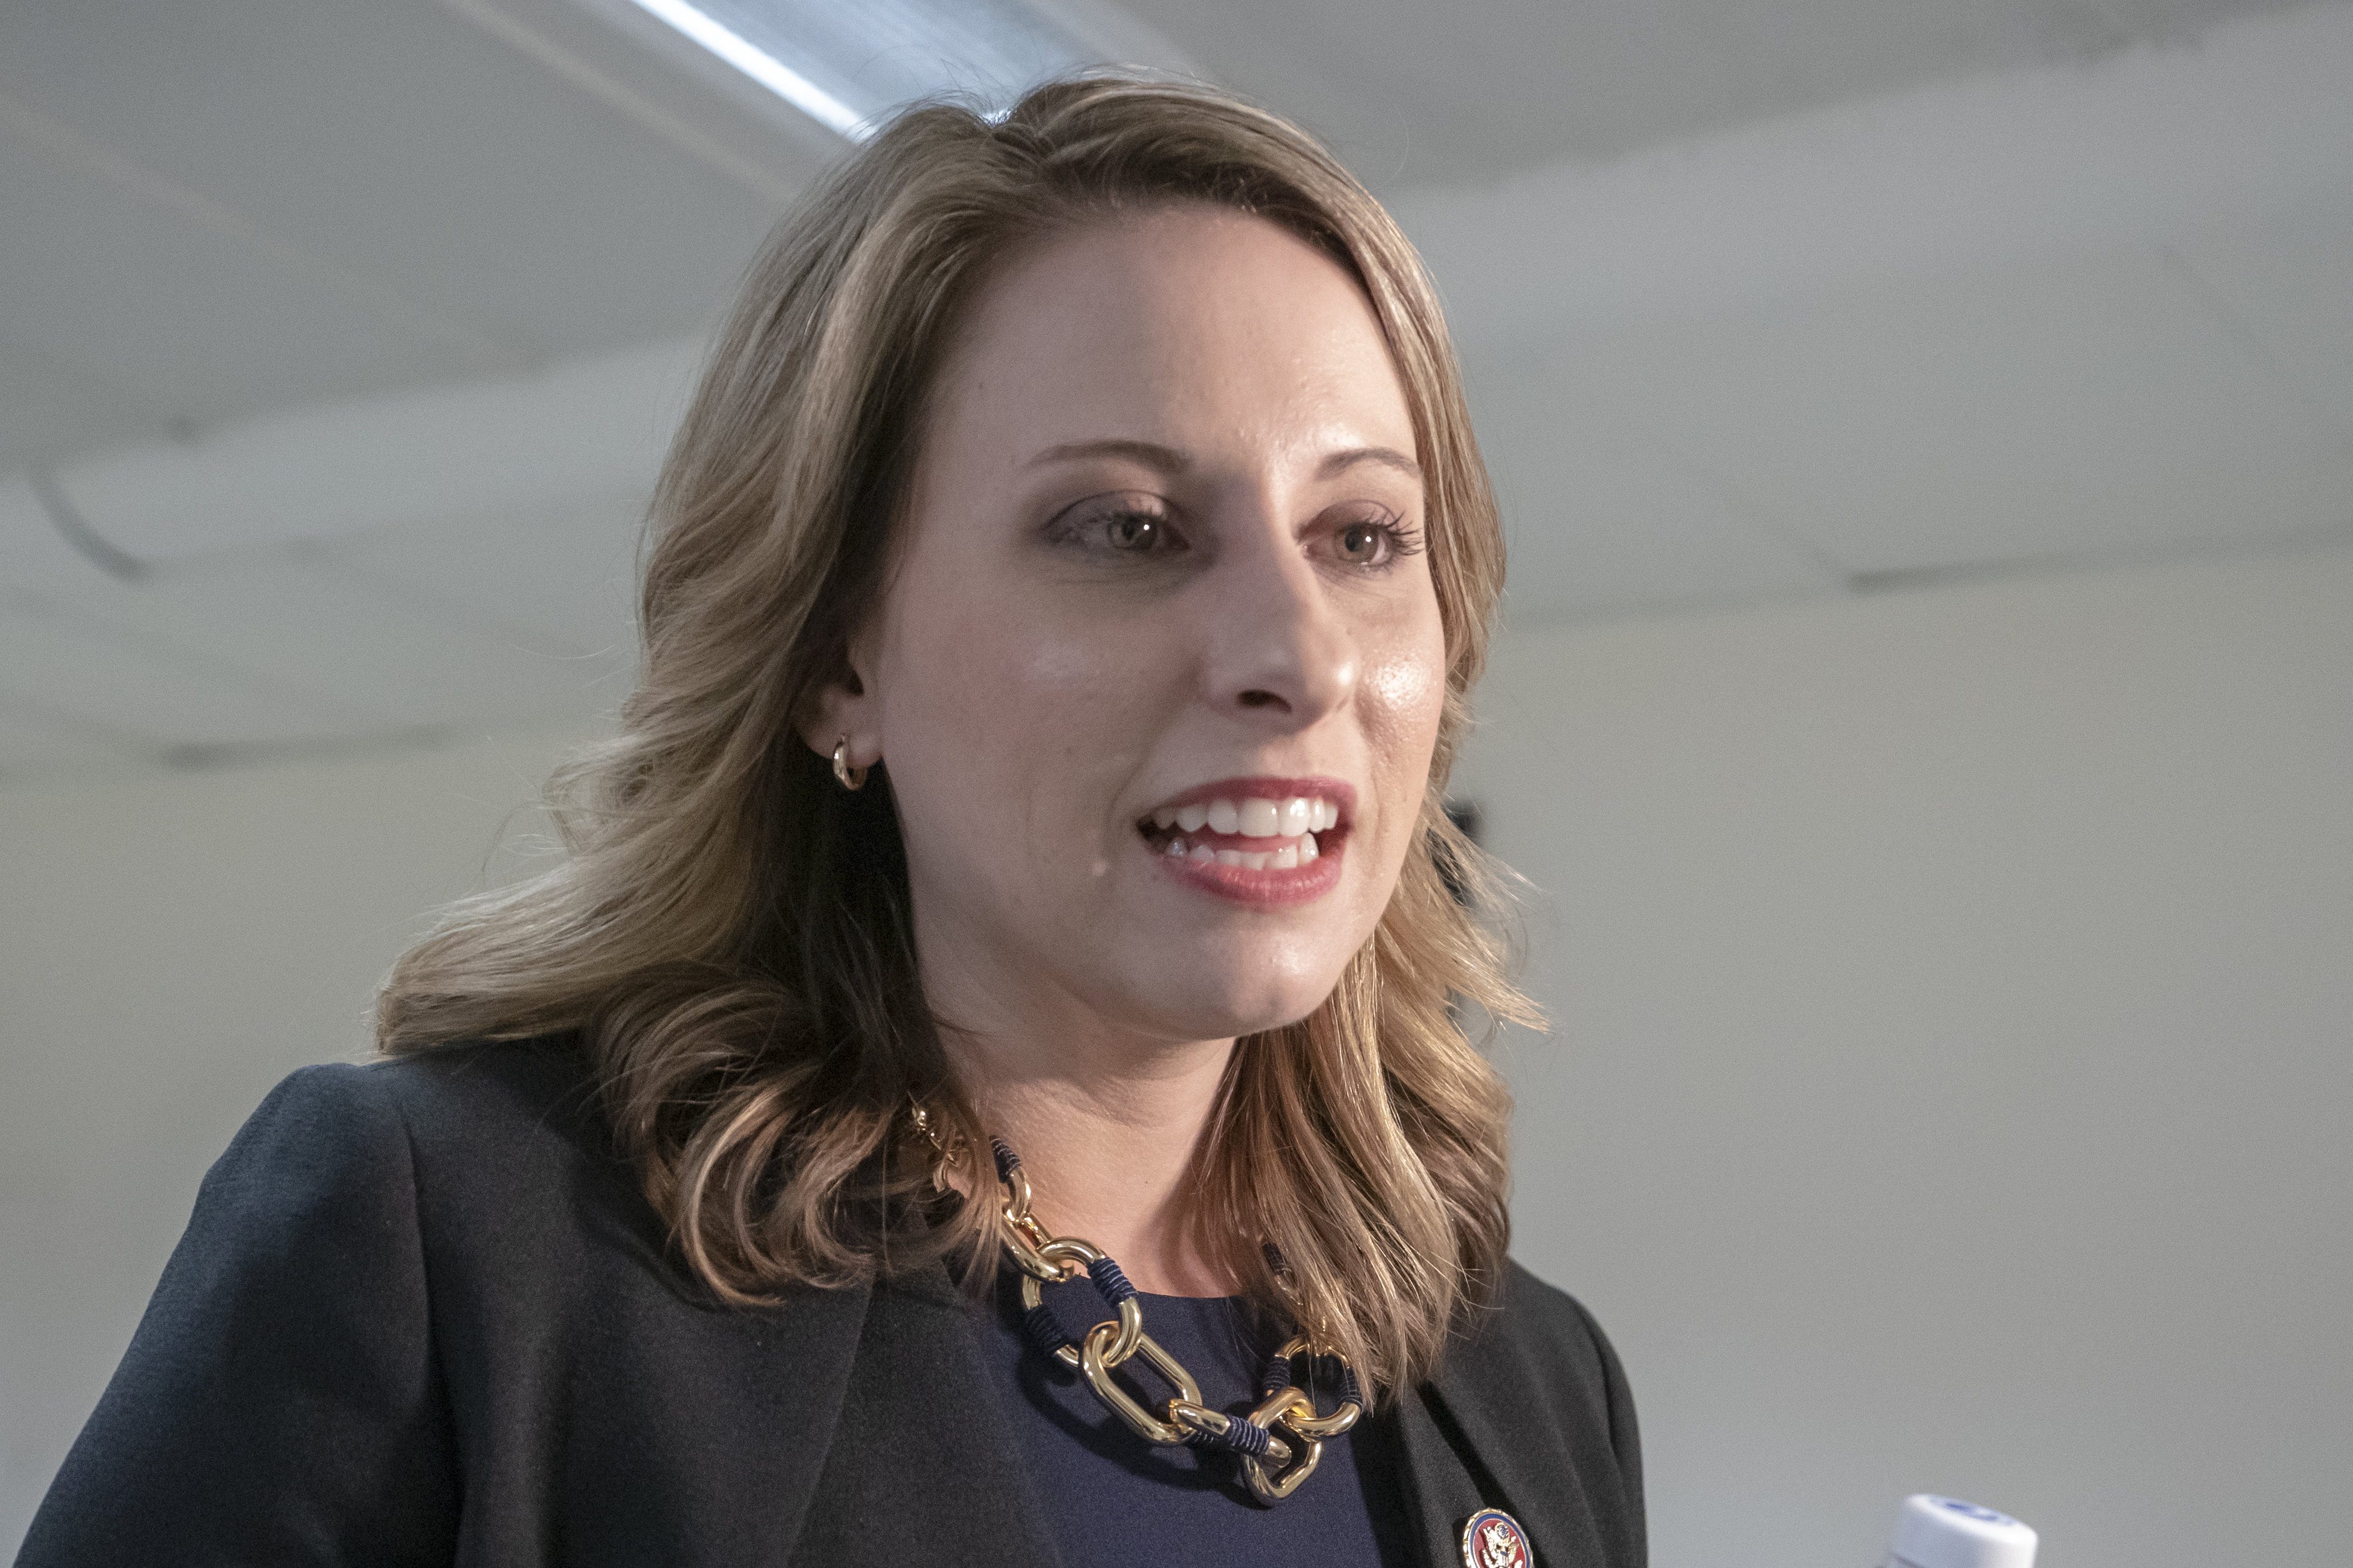 California Rep. Katie Hill resigns amid ethics investigation The North State Journal